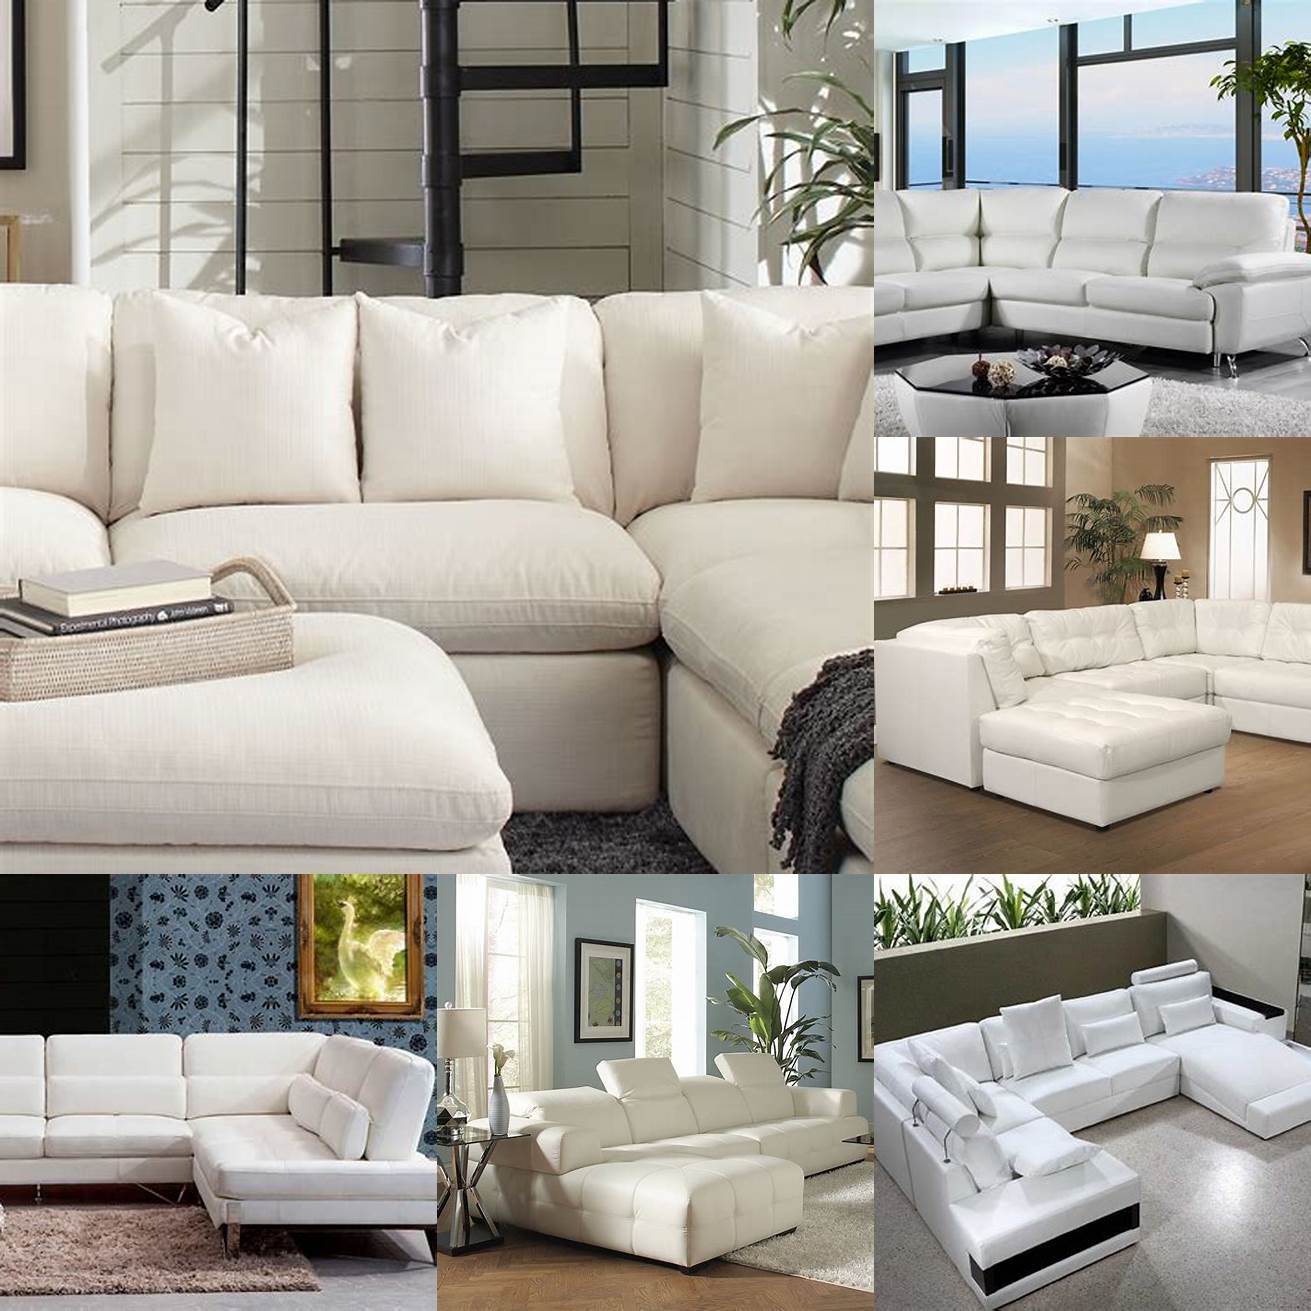 White Leather Sectional Sofa with Neutral Colors